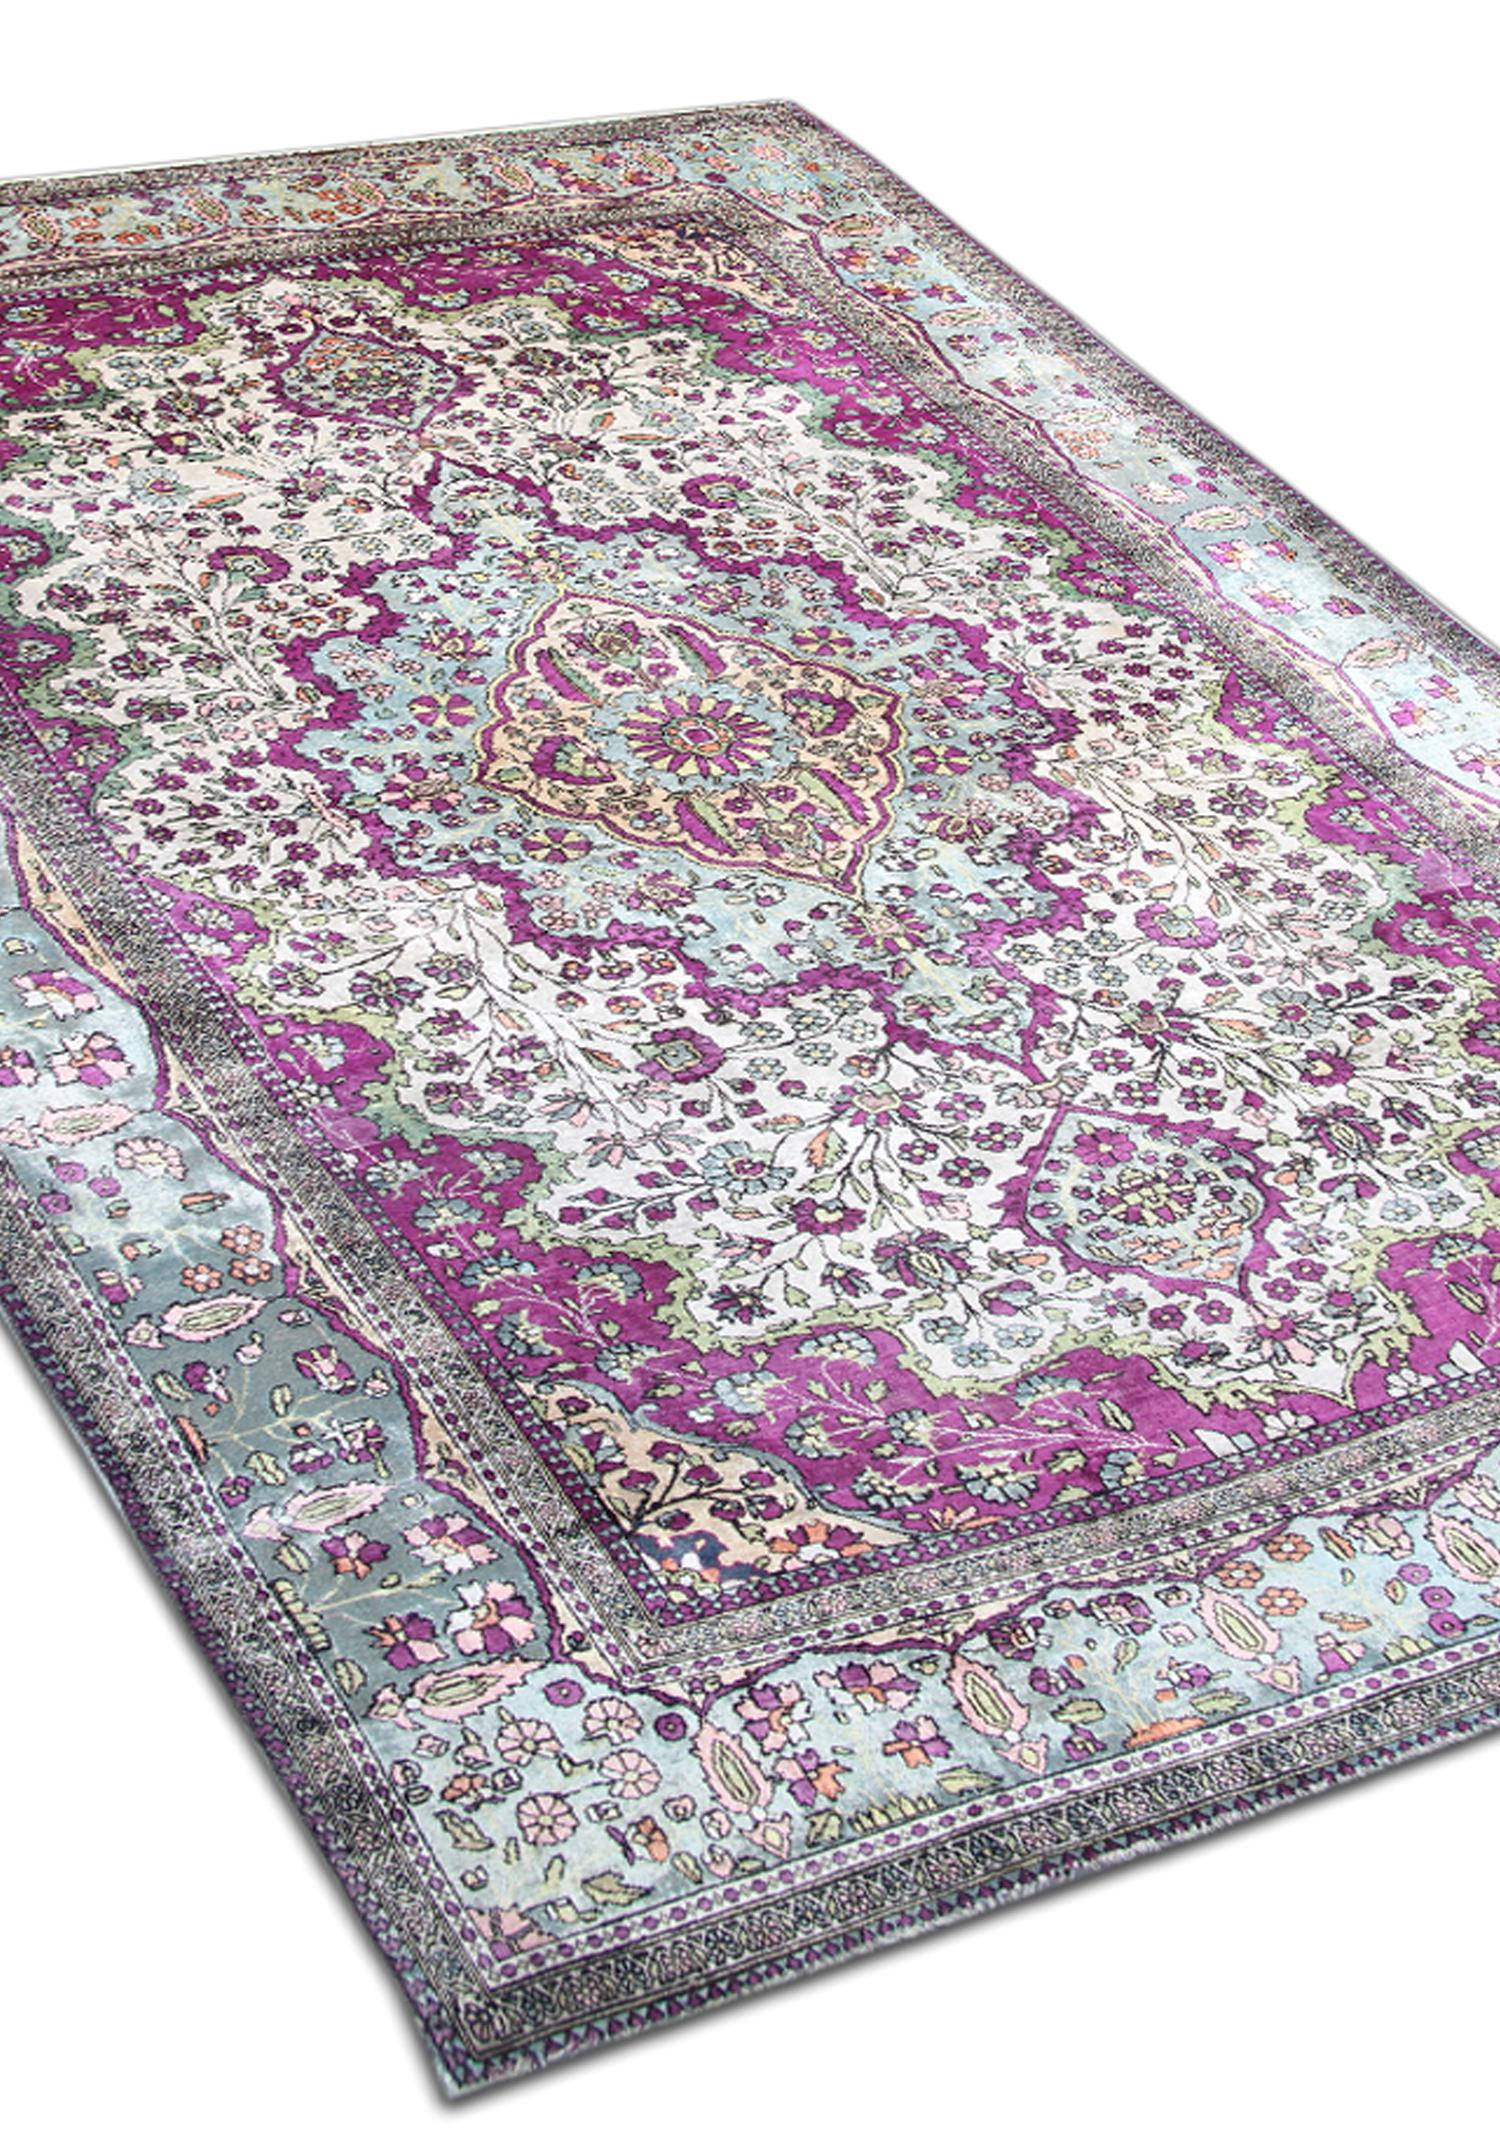 This rare beautiful silk area rug is an excellent example of silk rugs woven in the 1880s. The design features a traditional medallion with floral motifs throughout. We are featuring ivory, blue and purple accents. Sophisticated and stylish this